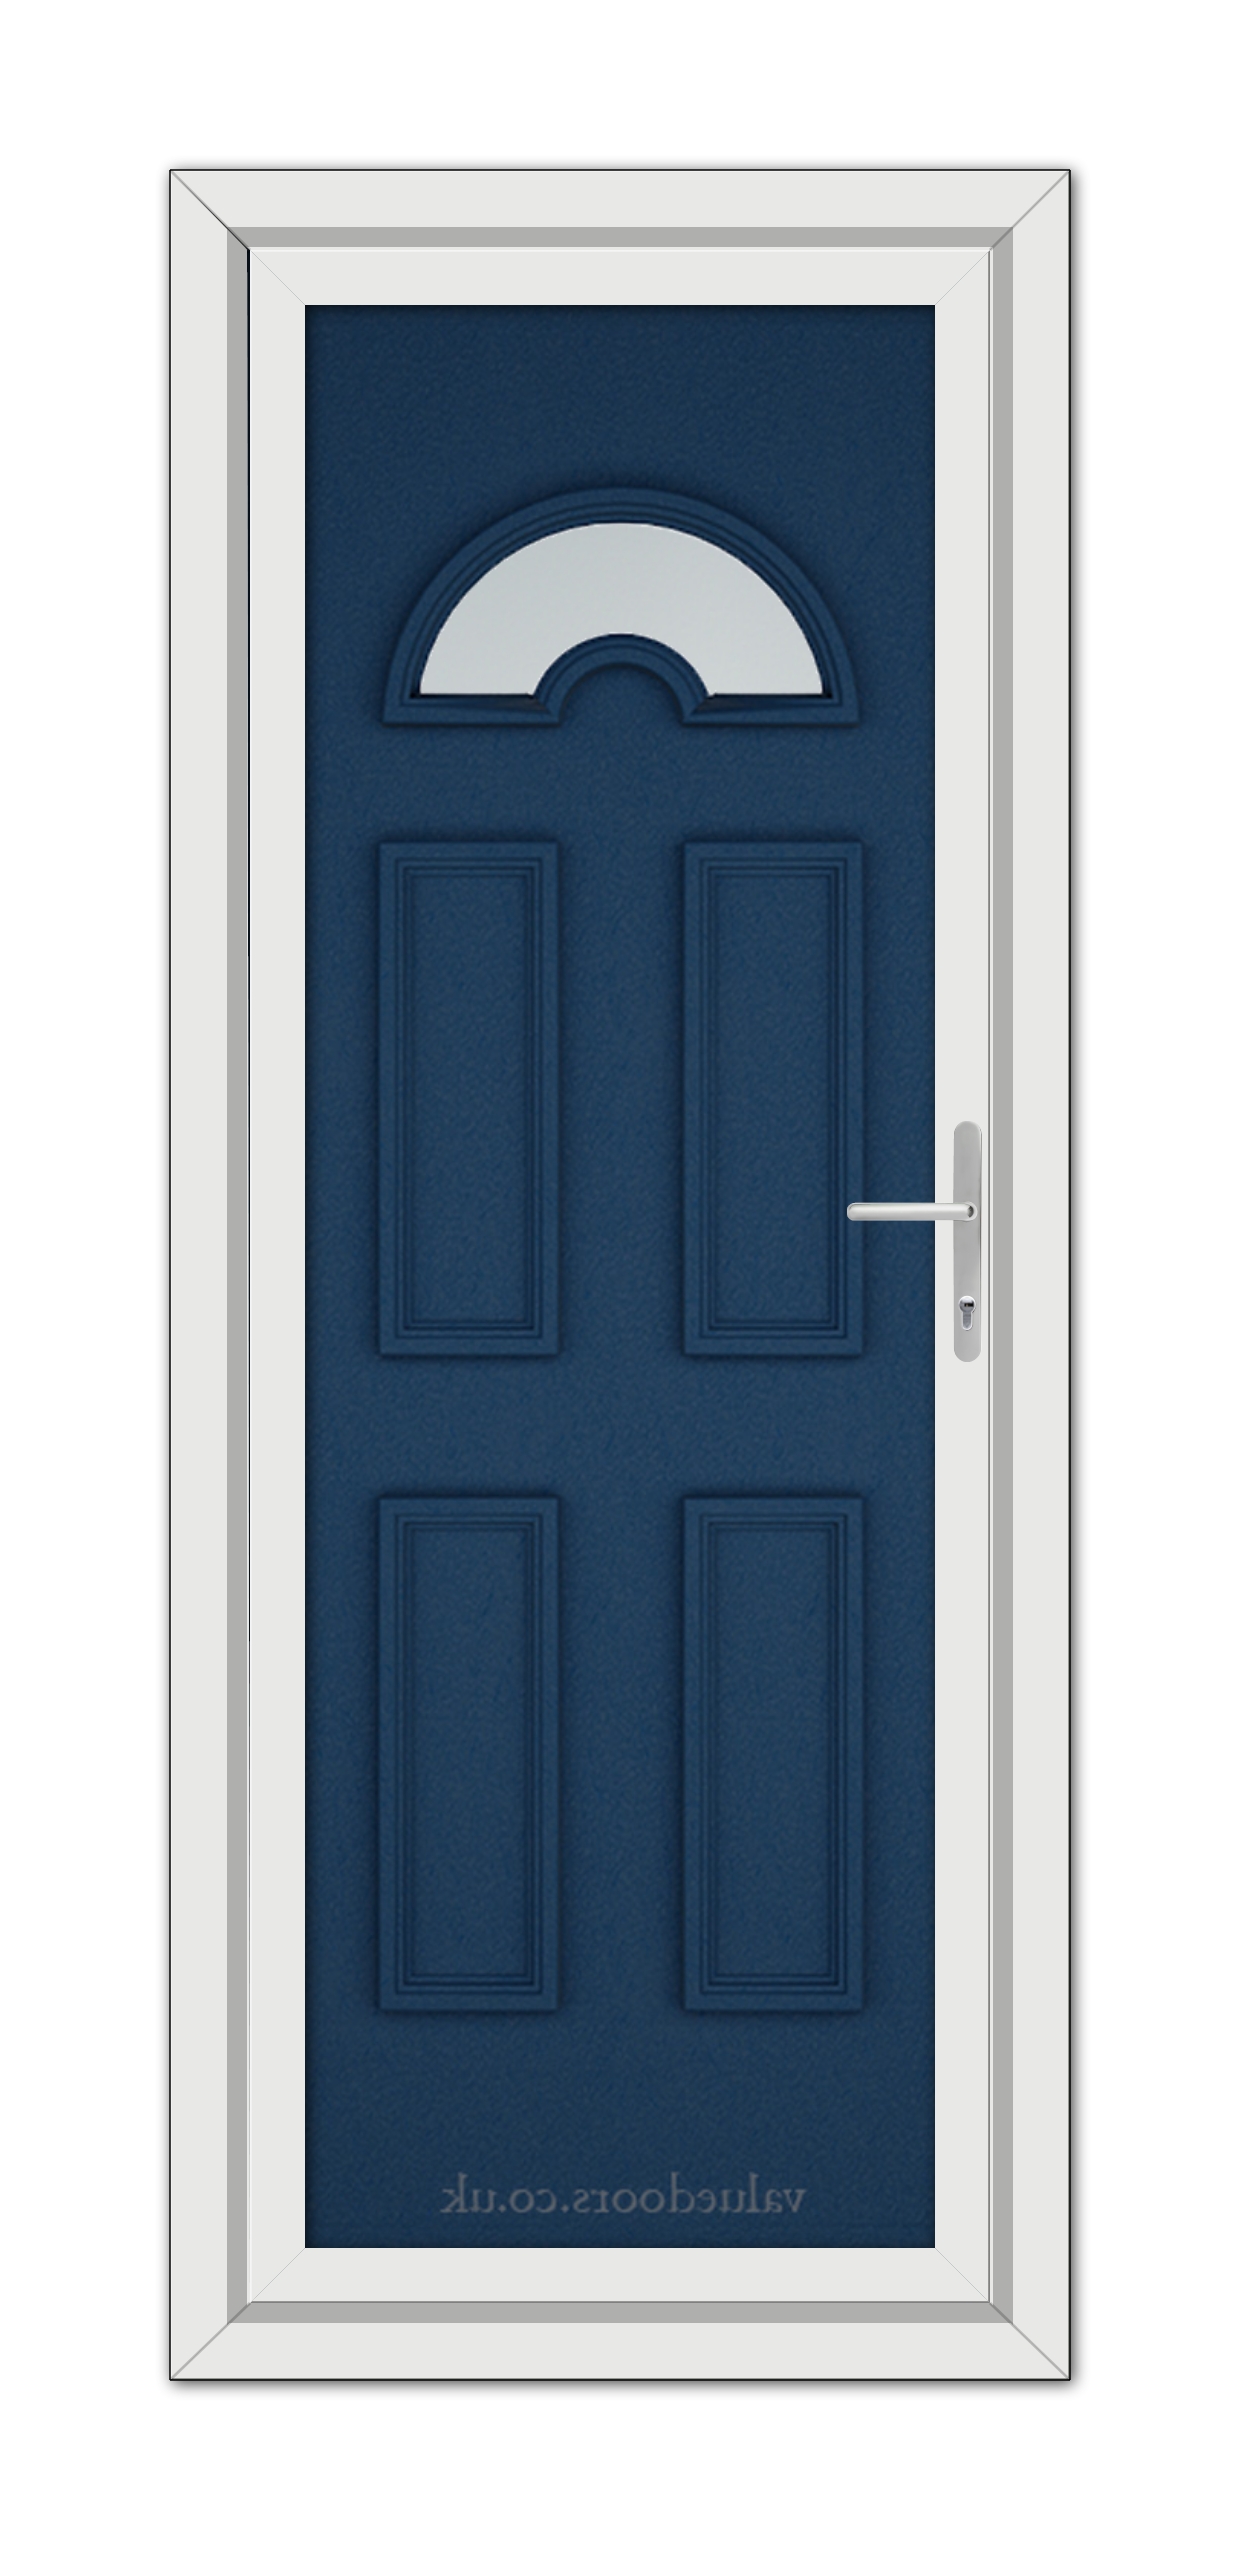 A vertical image of a closed, Blue Sandringham uPVC Door with a semicircular window at the top and a silver handle, set within a white frame.